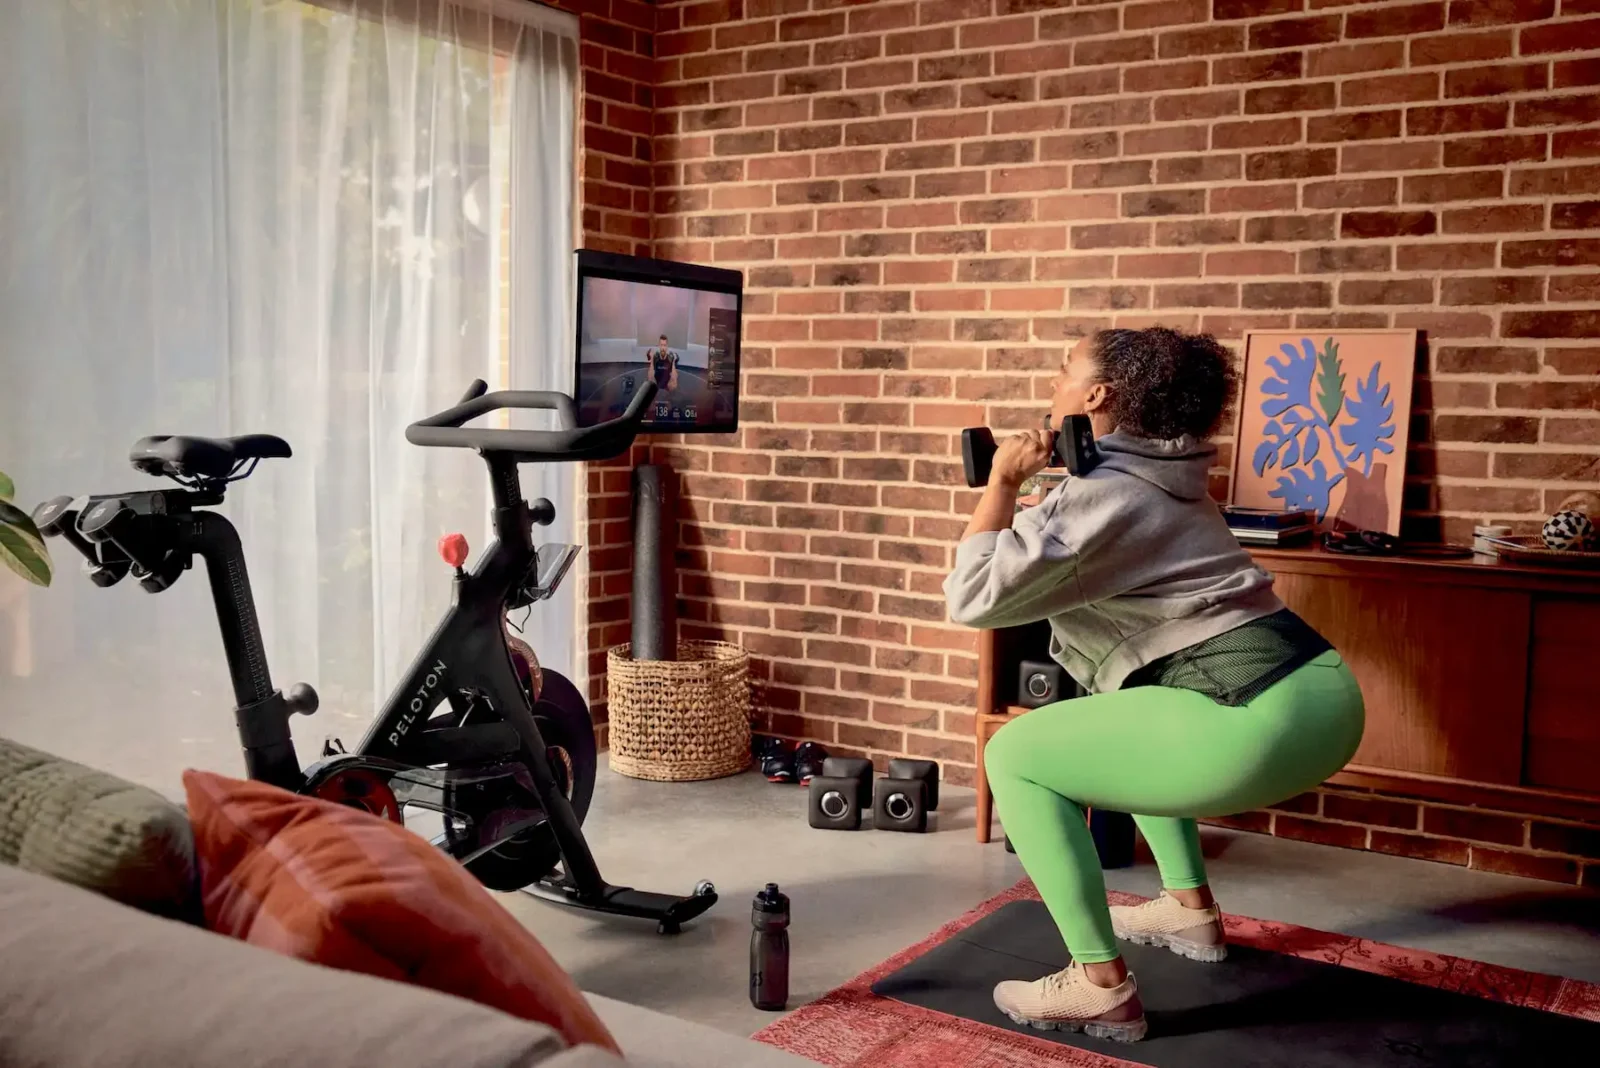 Peloton made its own fitness apparel to rival Lululemon and Nike